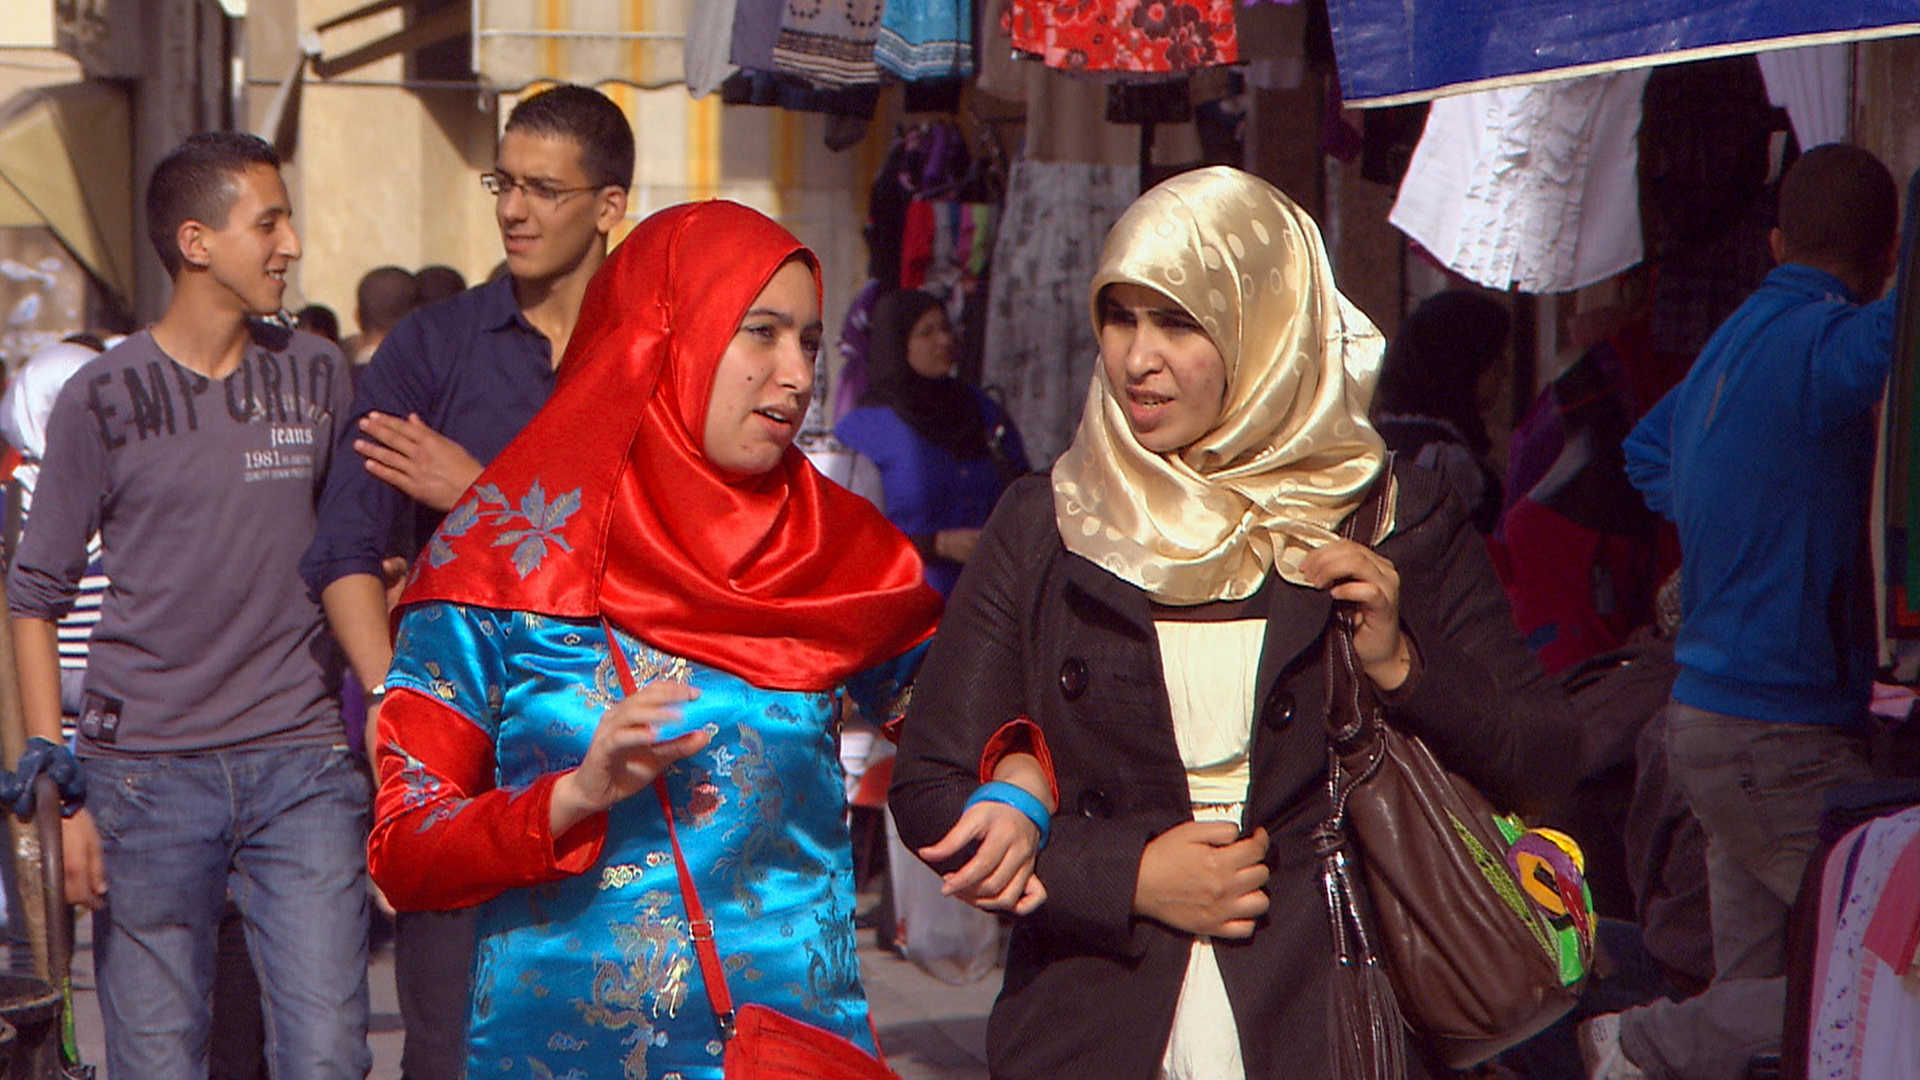 Women in the streets of Tangier